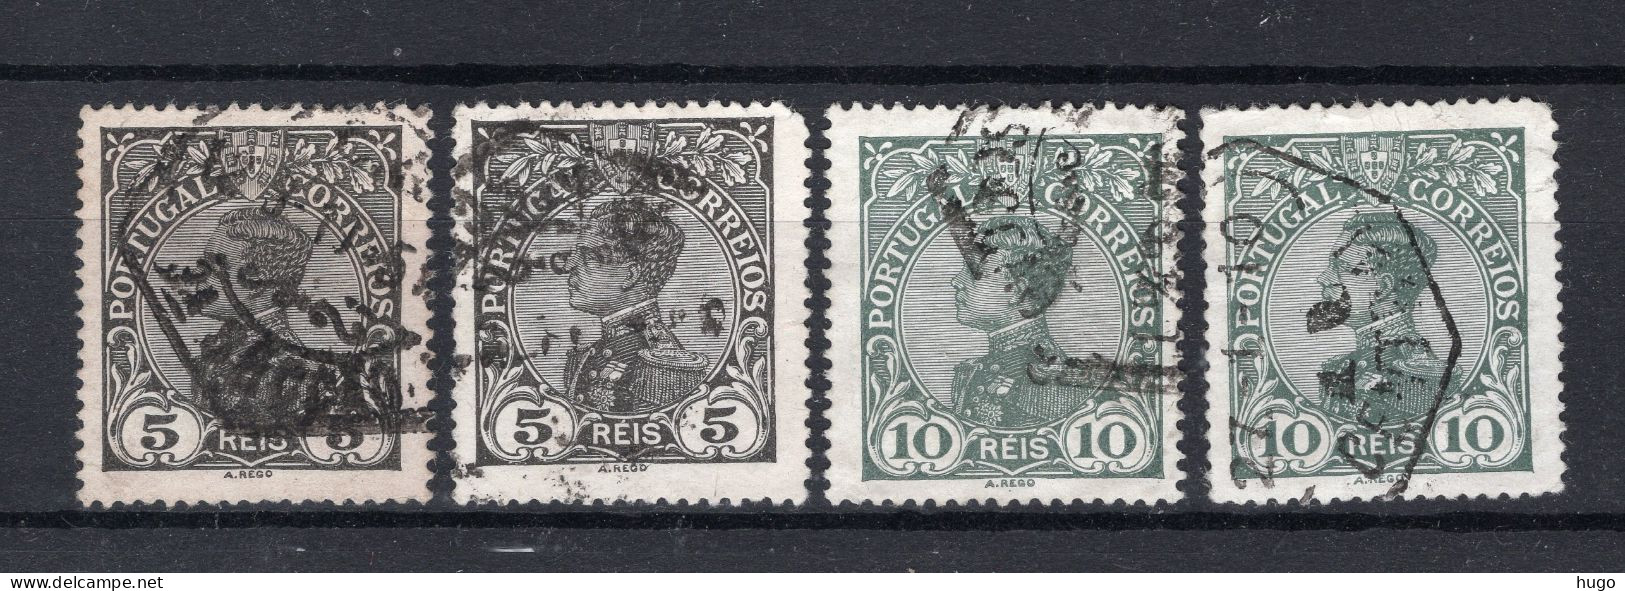 PORTUGAL Yt. 155/156° Gestempeld 1910 - Used Stamps